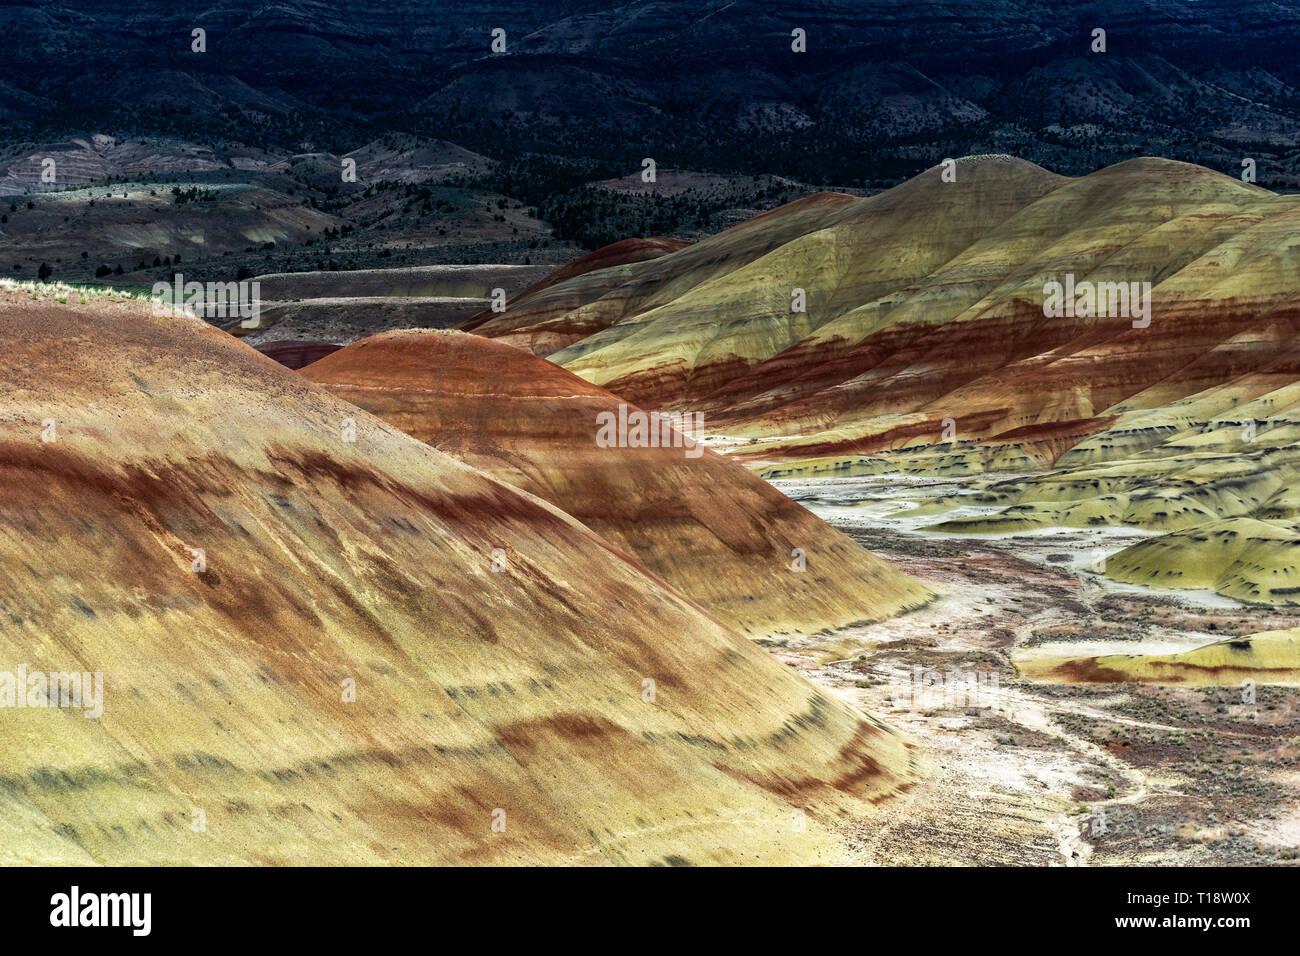 Eroded sedimentary rock formation with colorful geological layers. Scenic landscape. Badlands scenery in Painted Hills, Mitchell, Central Oregon, USA. Stock Photo